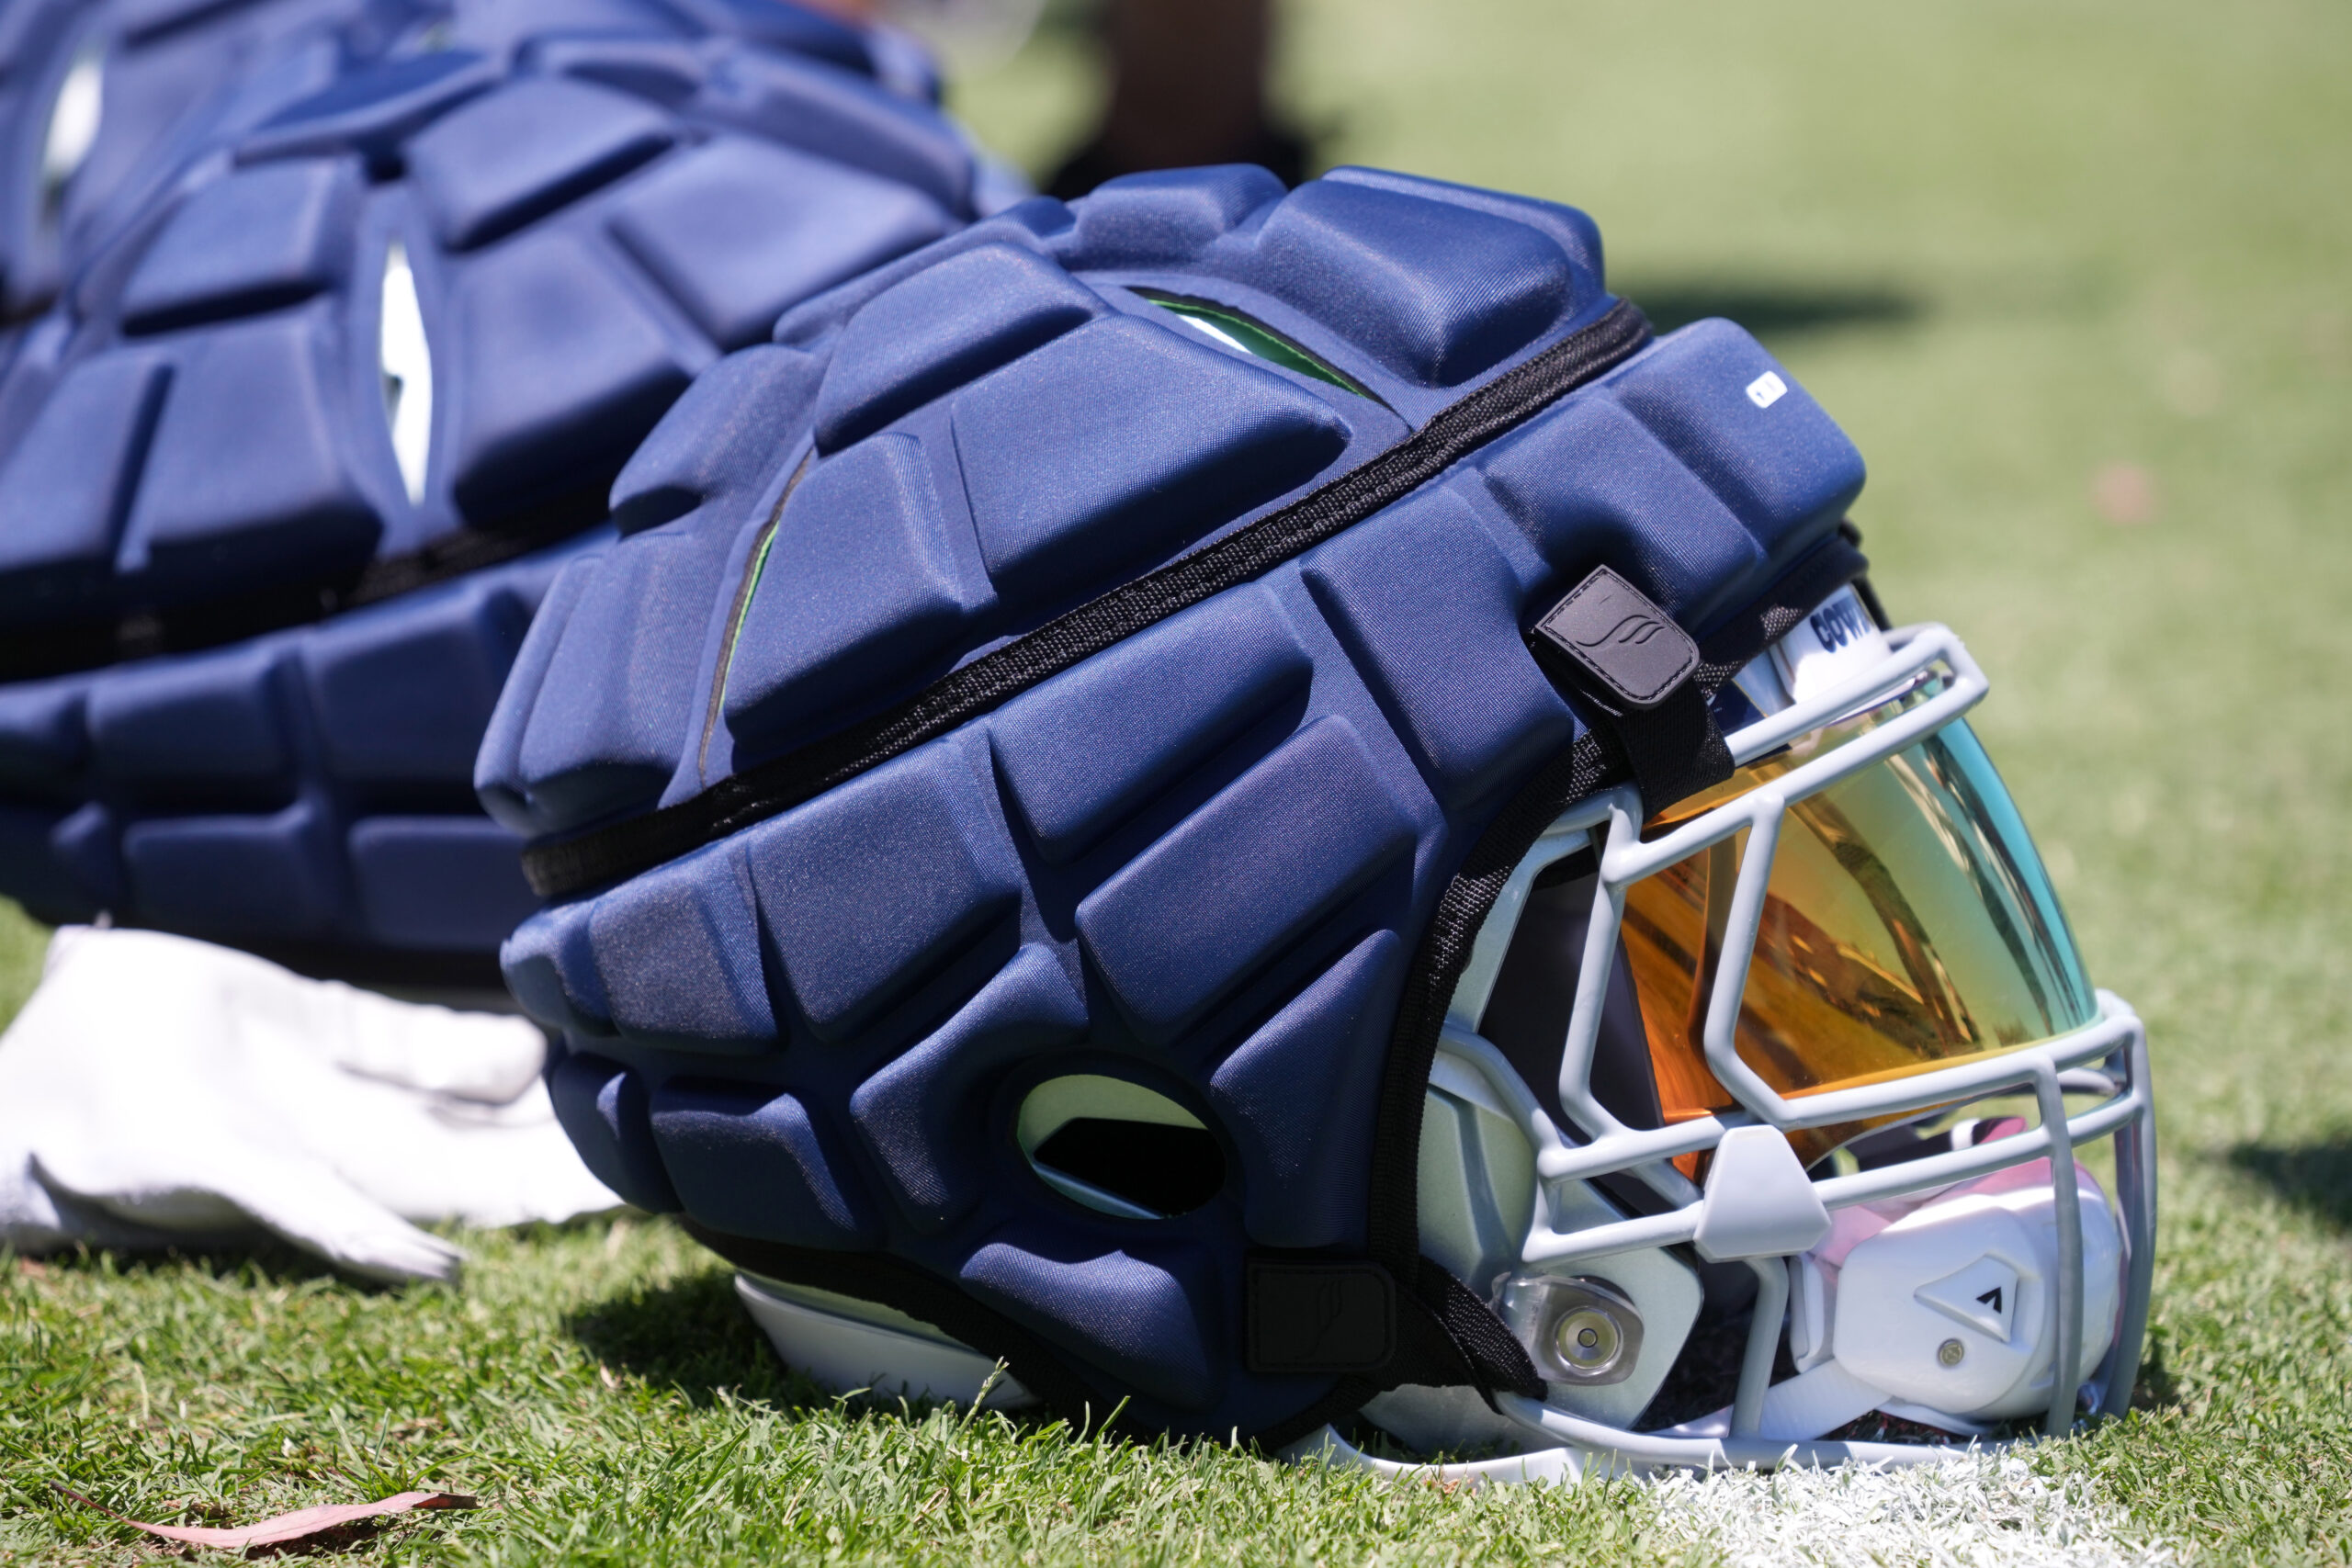 Dallas Cowboys helmets with Guardian helmet caps during training camp at Marriott Residence Inn-River Ridge Playing Fields.